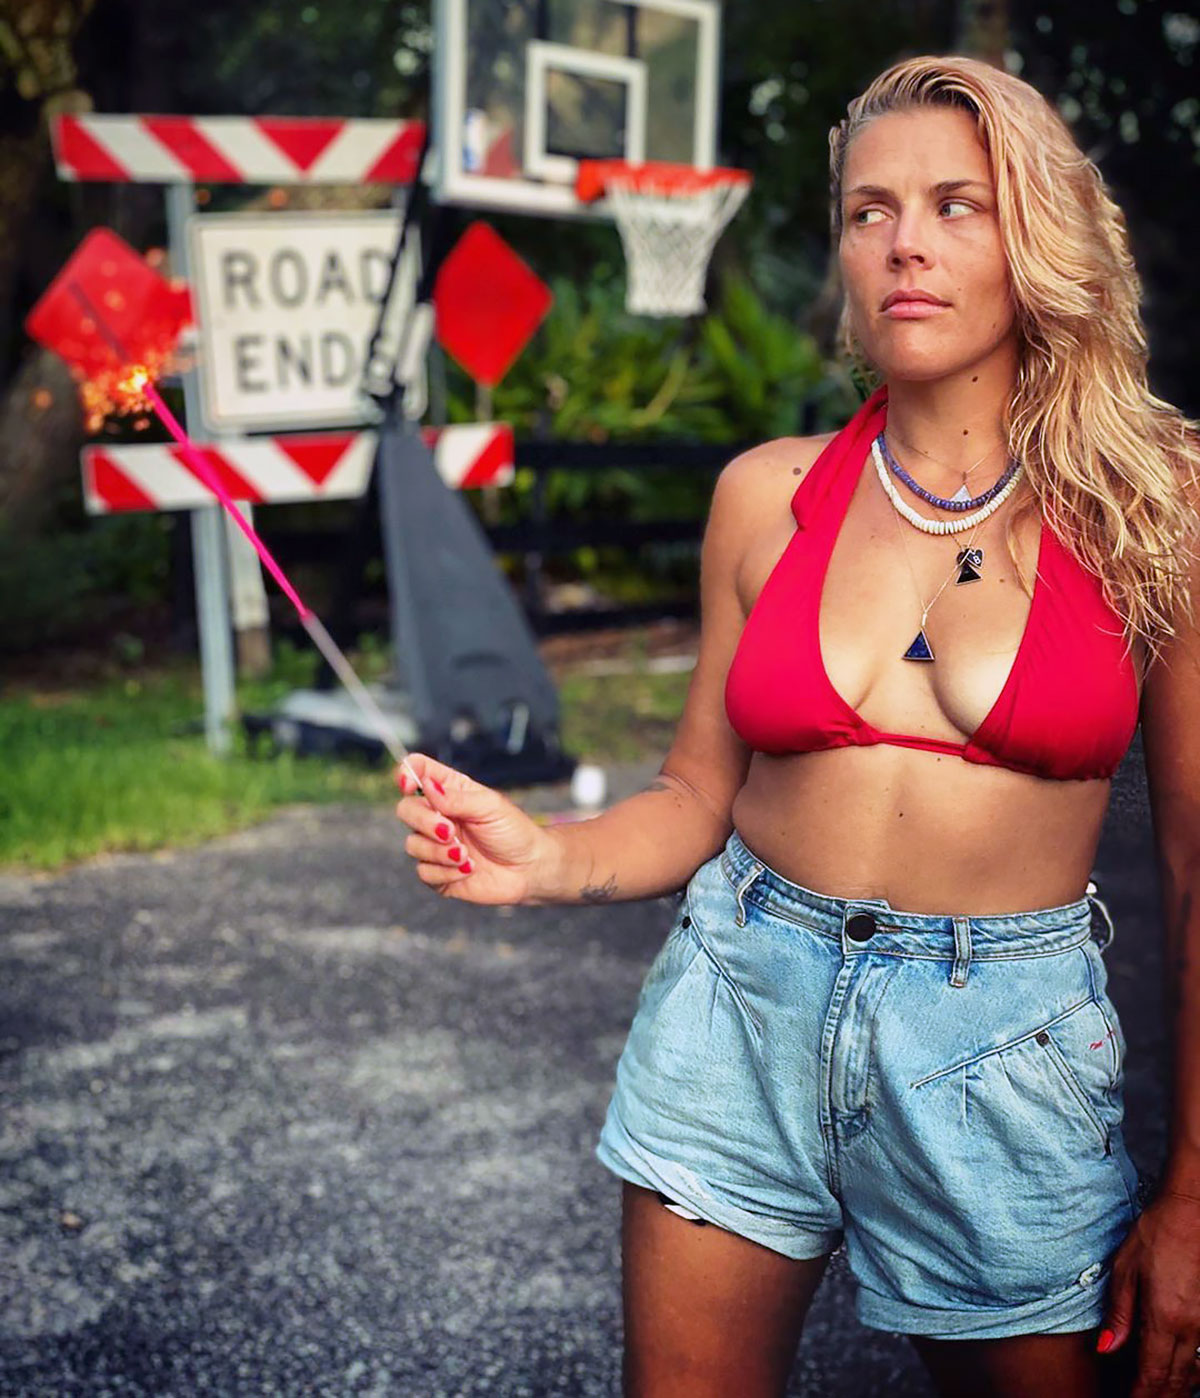 Busy Philipps Shares Daughter's Reaction to Jean Shorts and Bikini